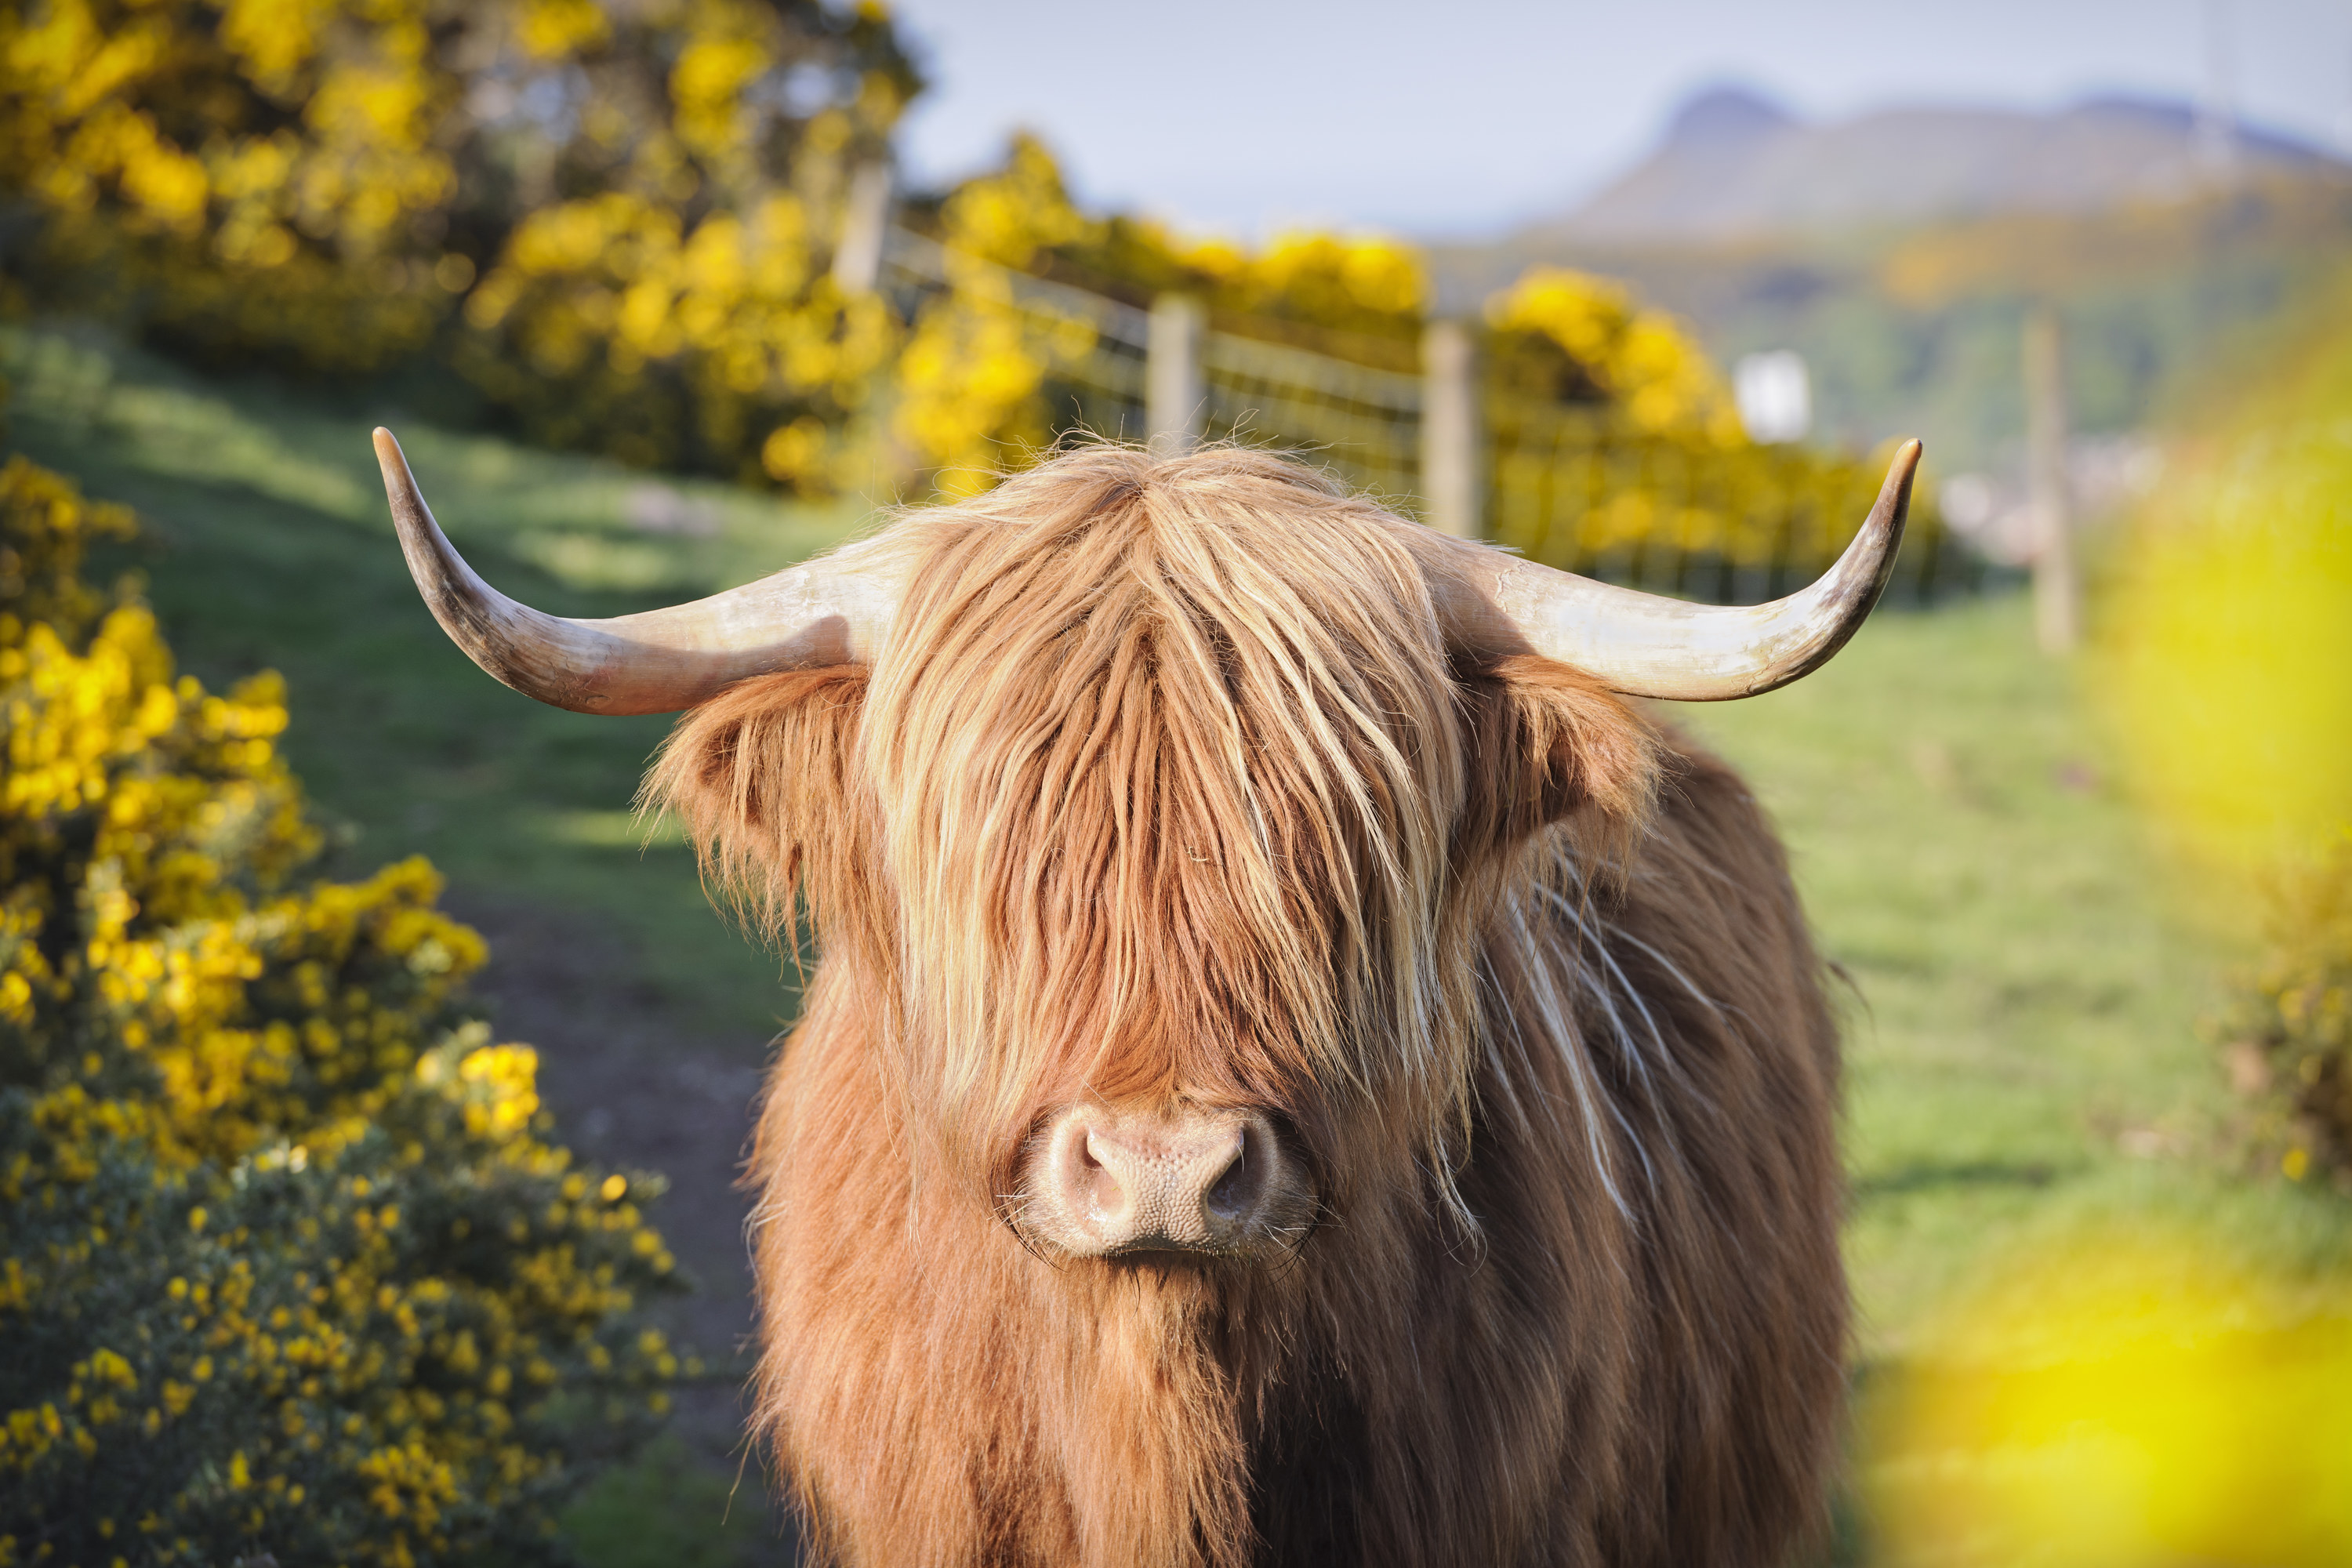 Portrait of a Highland Cow with long hair covering its face